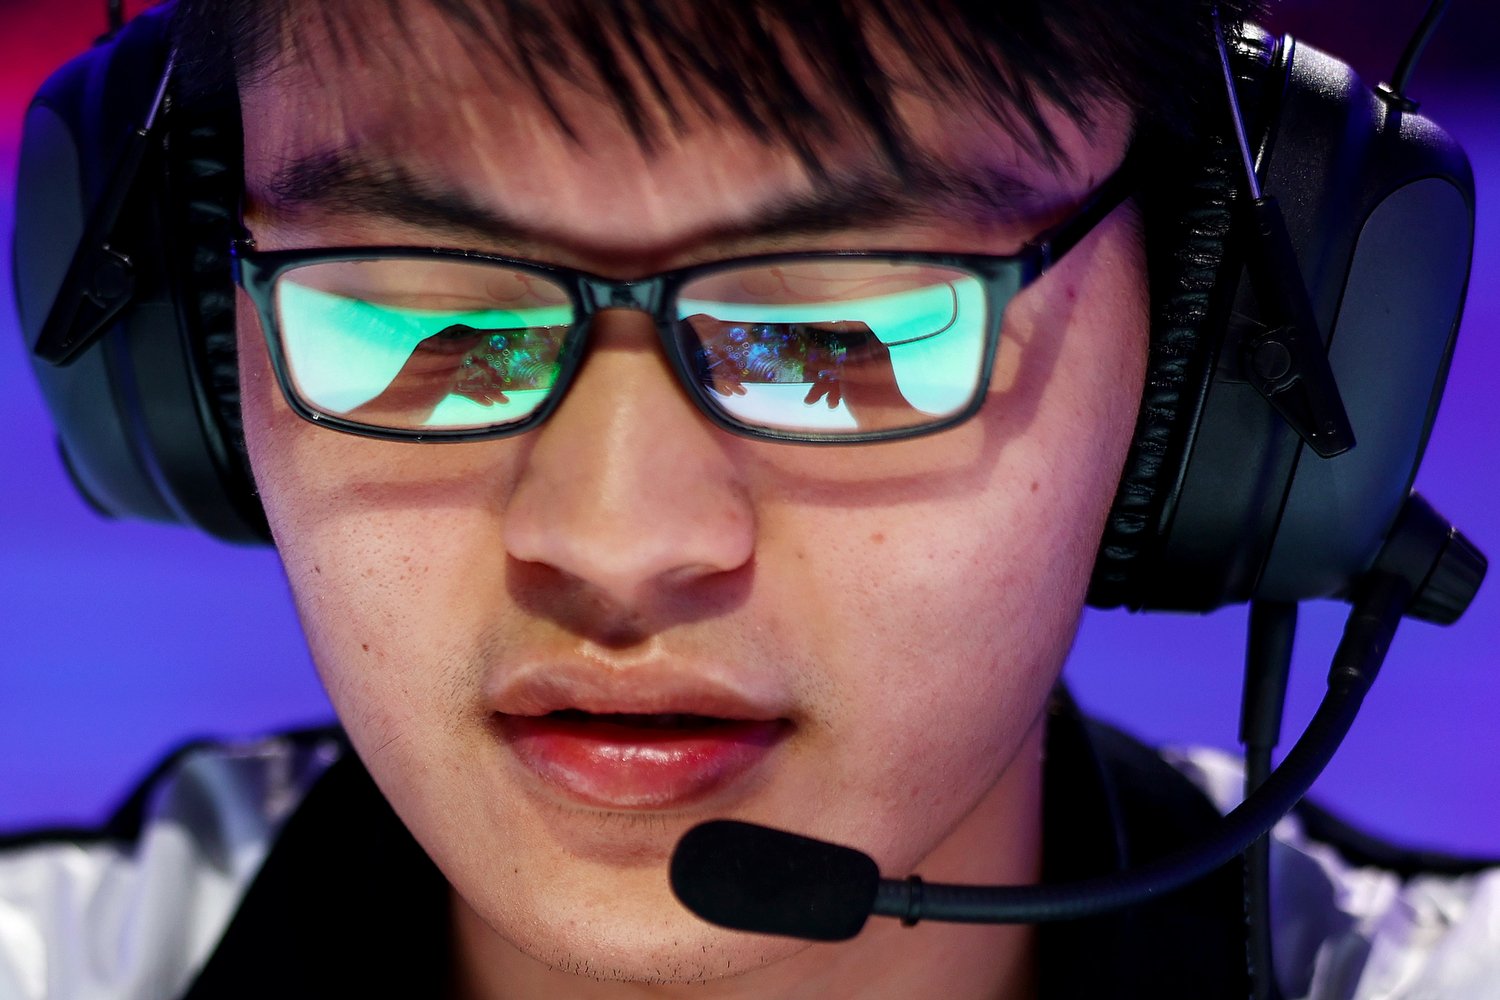  SINGAPORE, SINGAPORE - JULY 09: Wei "Nian" Haojin of Nova Esports prepares to compete in the finals of the 2022 Wild Rift Icons Global Championship against J Team at Suntec Singapore International Convention & Exhibition Centre on July 09, 2022 in S